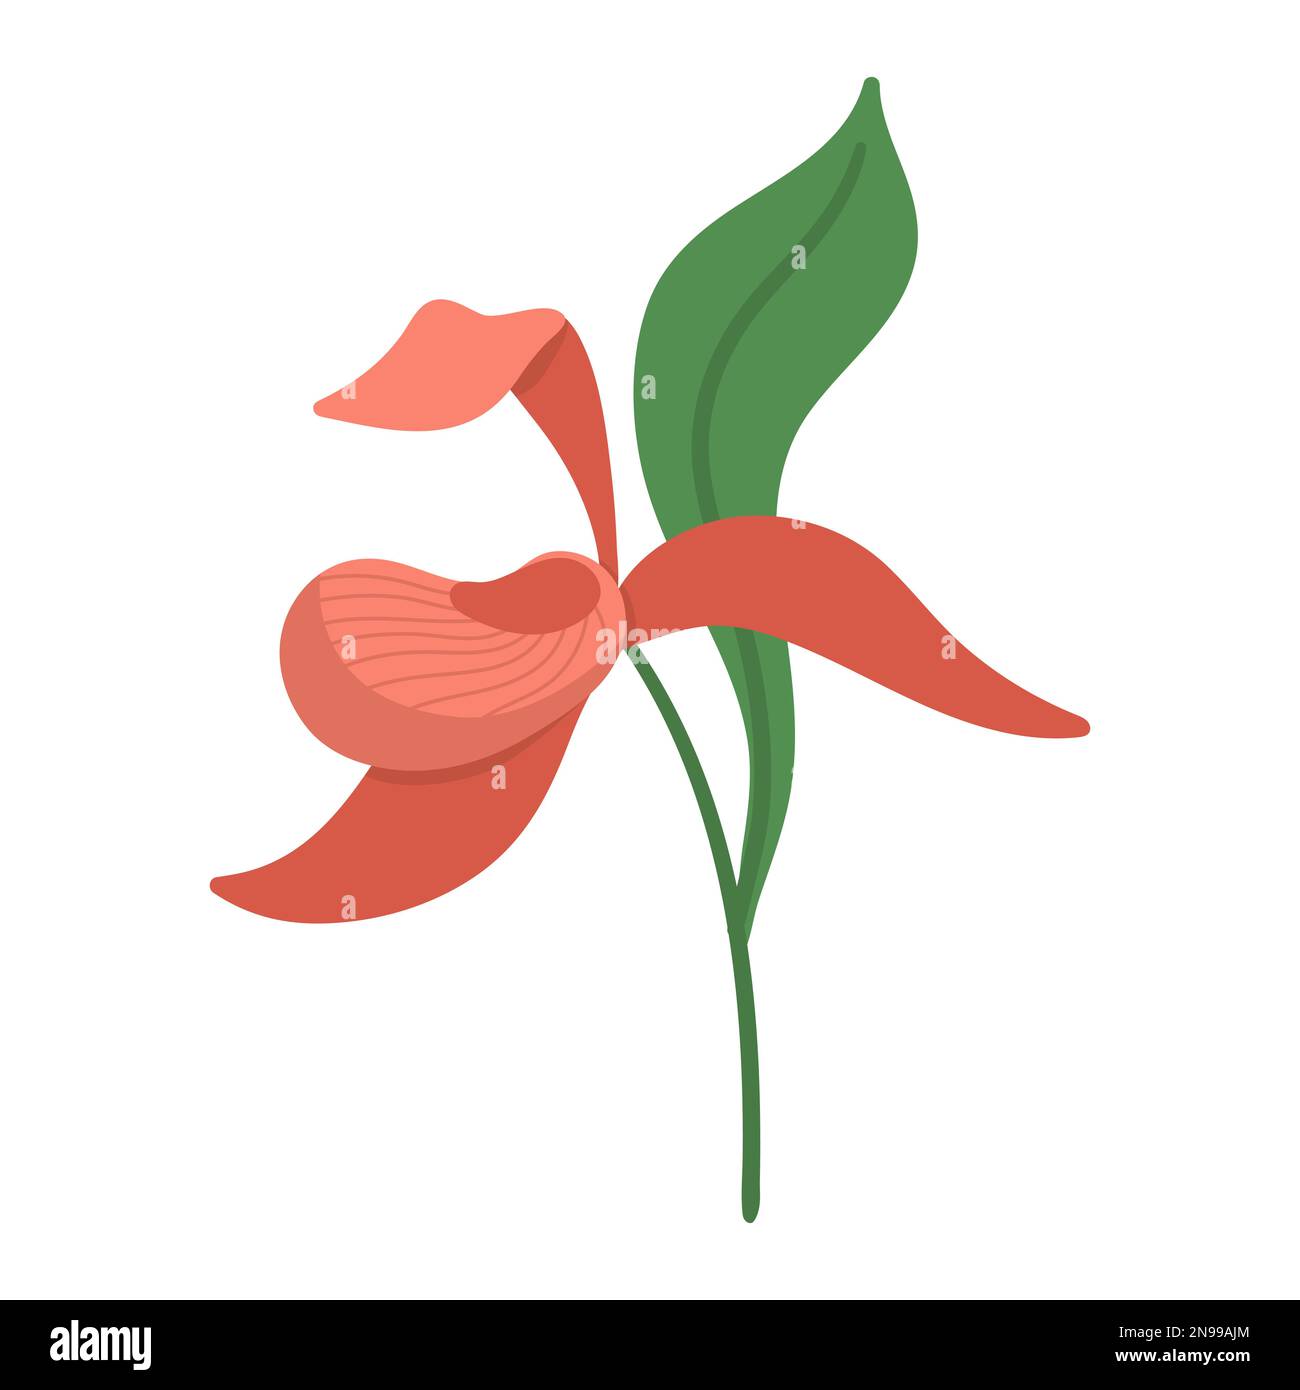 Vector lady slipper icon. Endangered species picture. Orchid isolated on white background. Blooming tropical plant illustration. Floral clipart. Cute Stock Vector